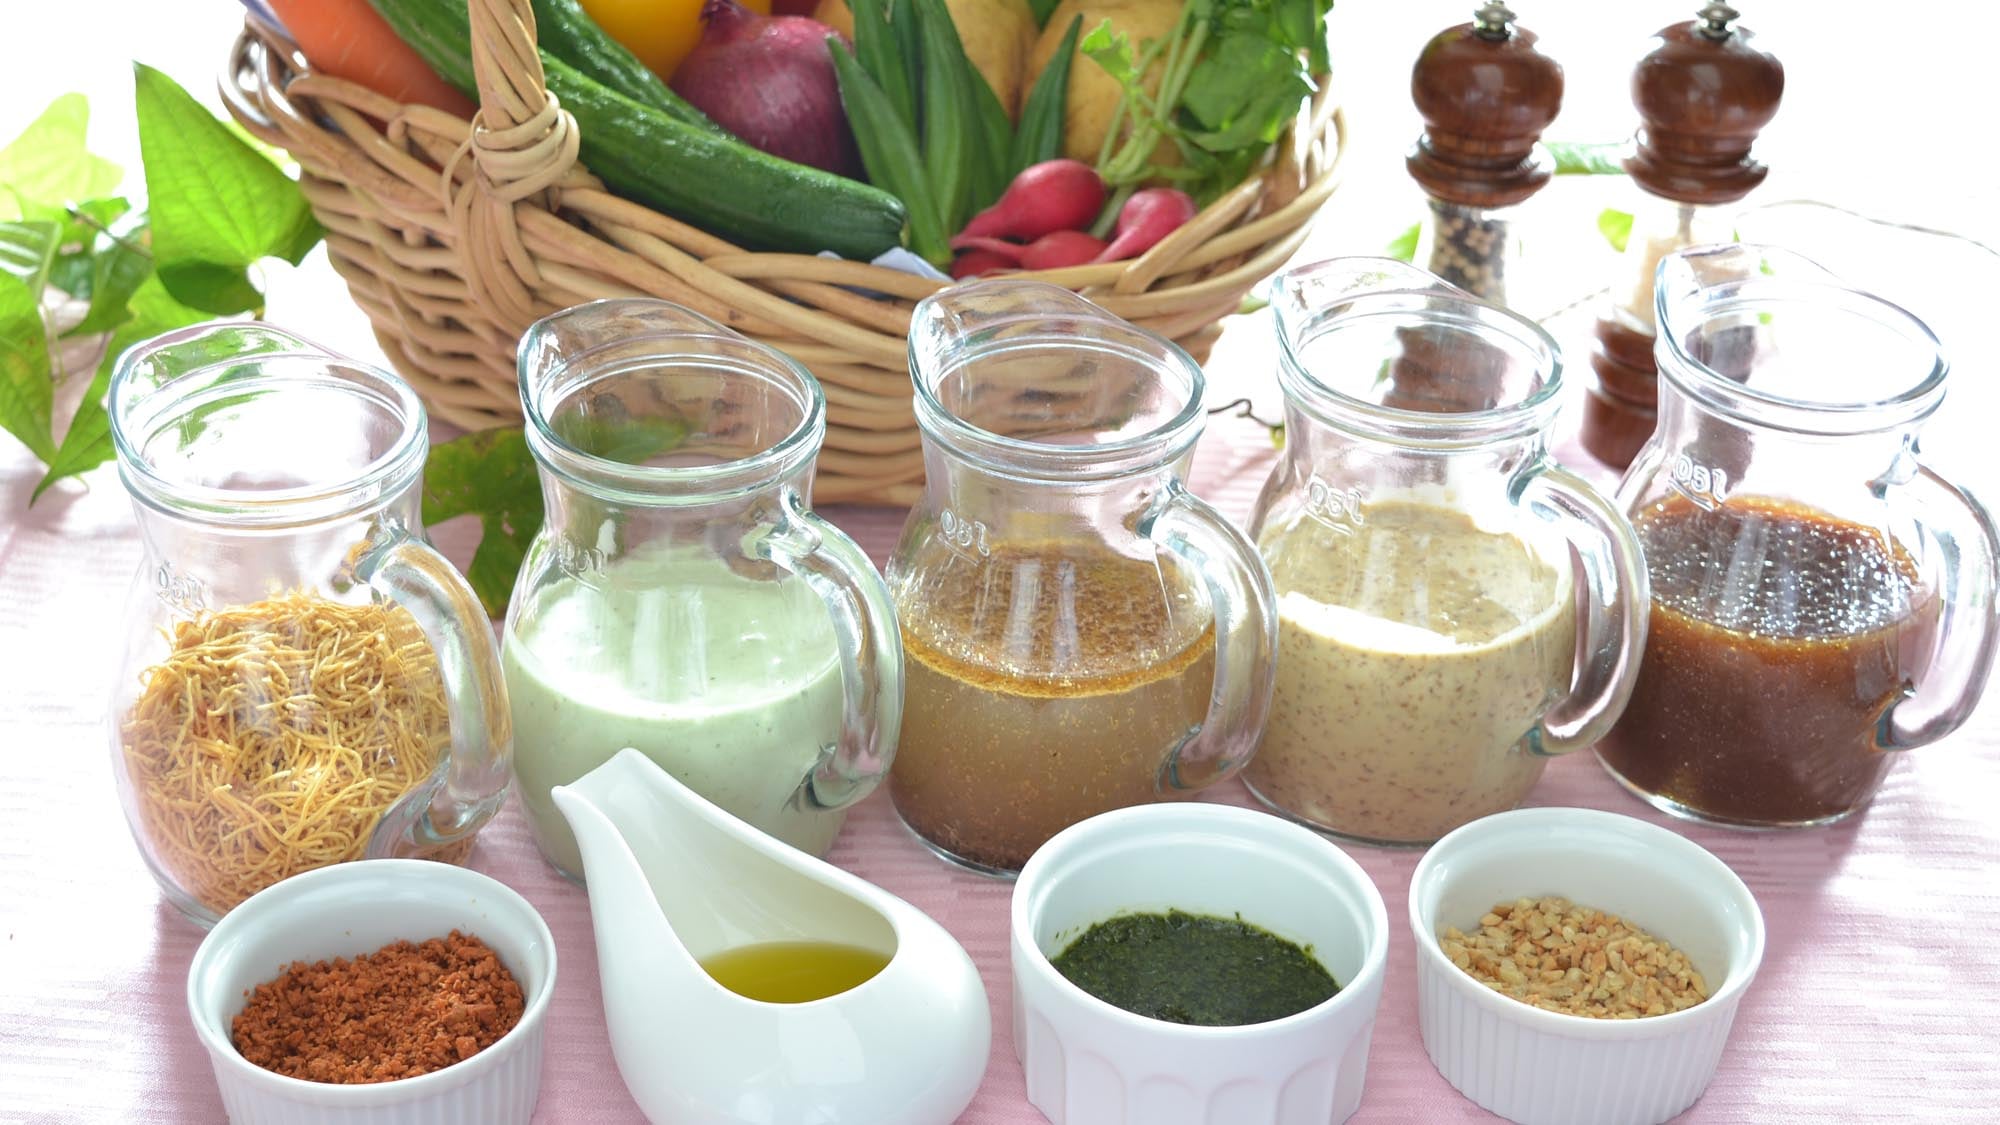 ◆Breakfast Dressings & Toppings: Various dressings and toppings are available.